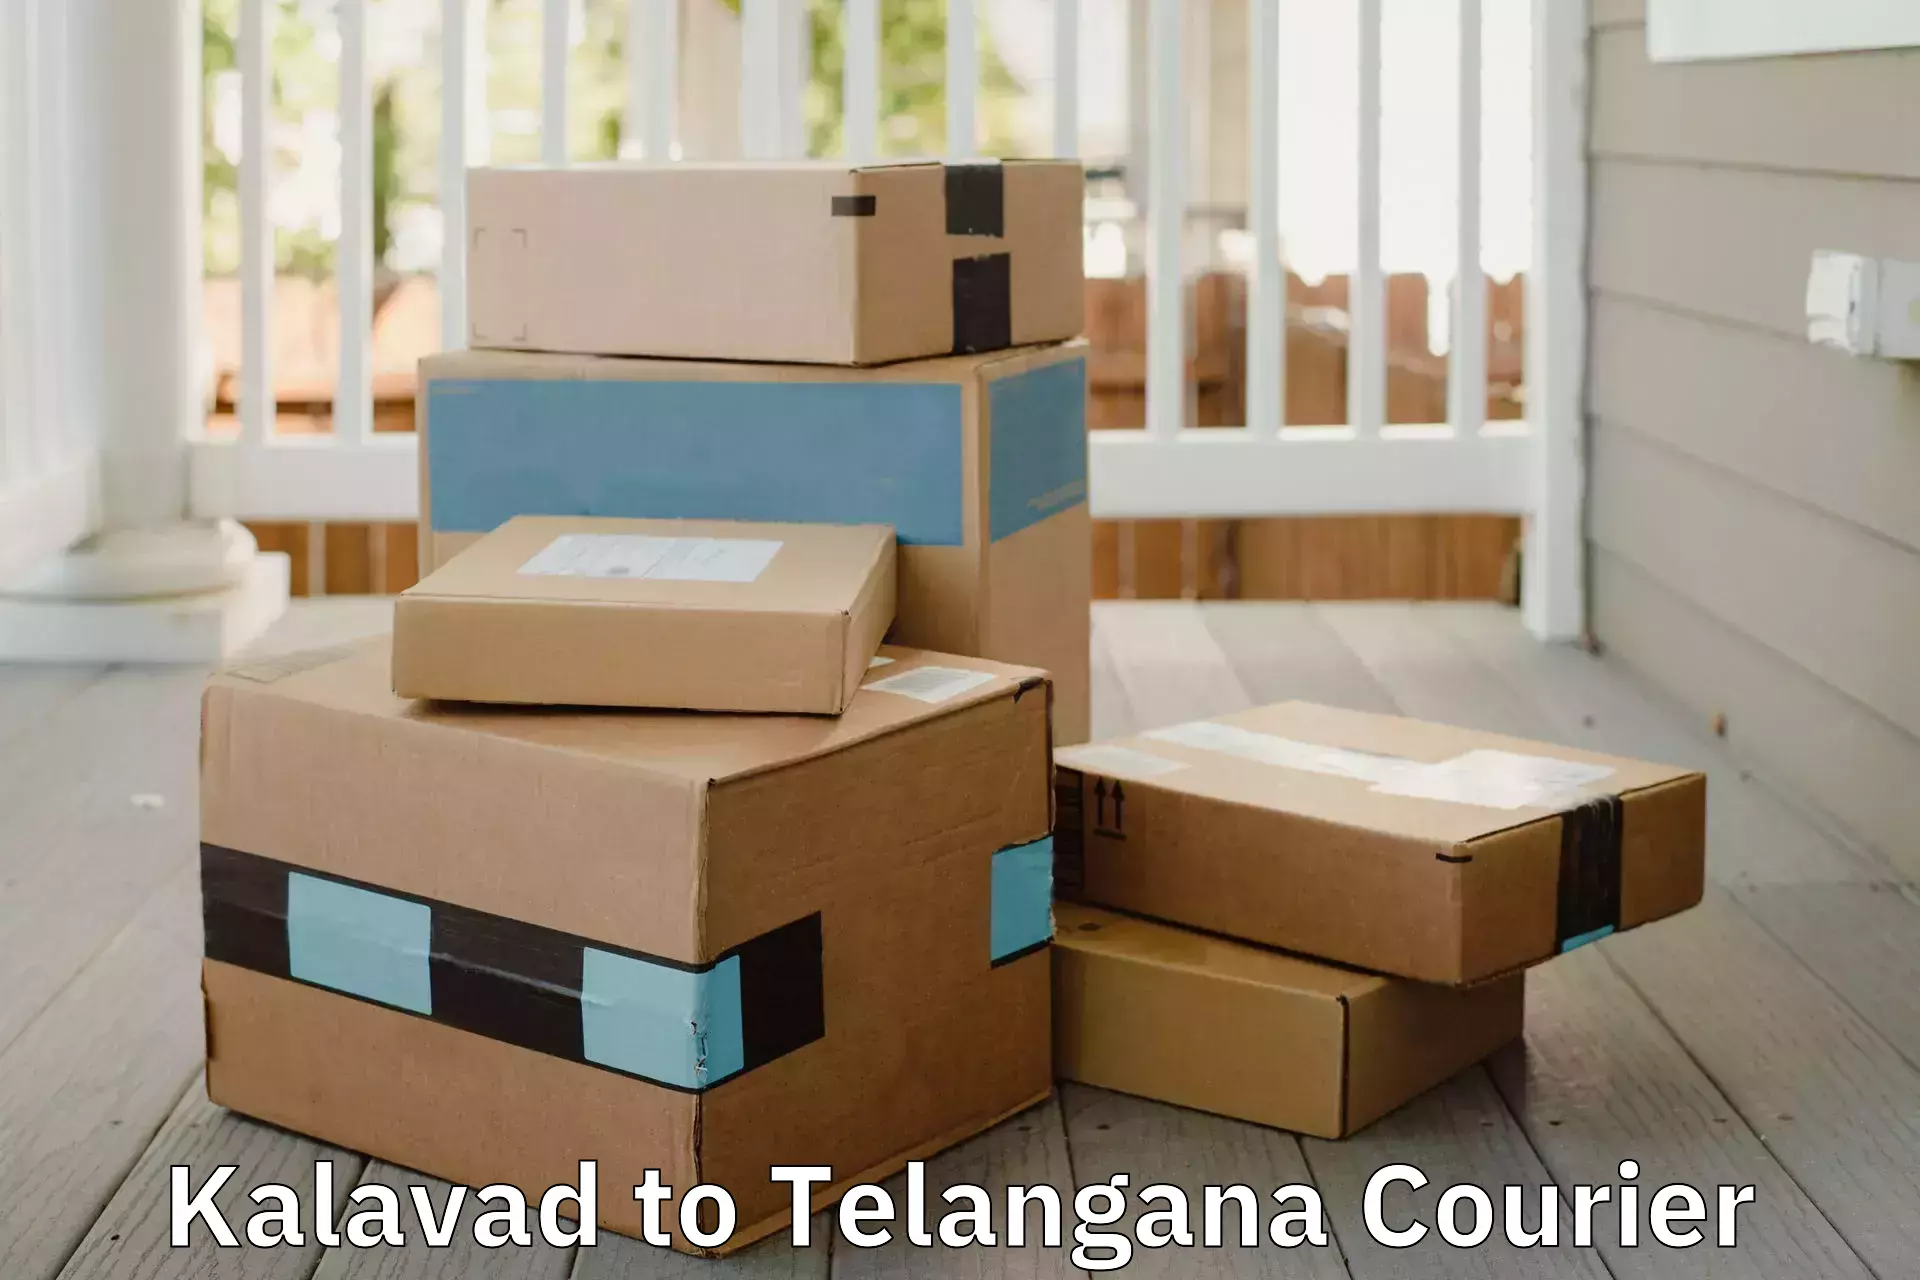 Furniture transport services in Kalavad to Sultanabad